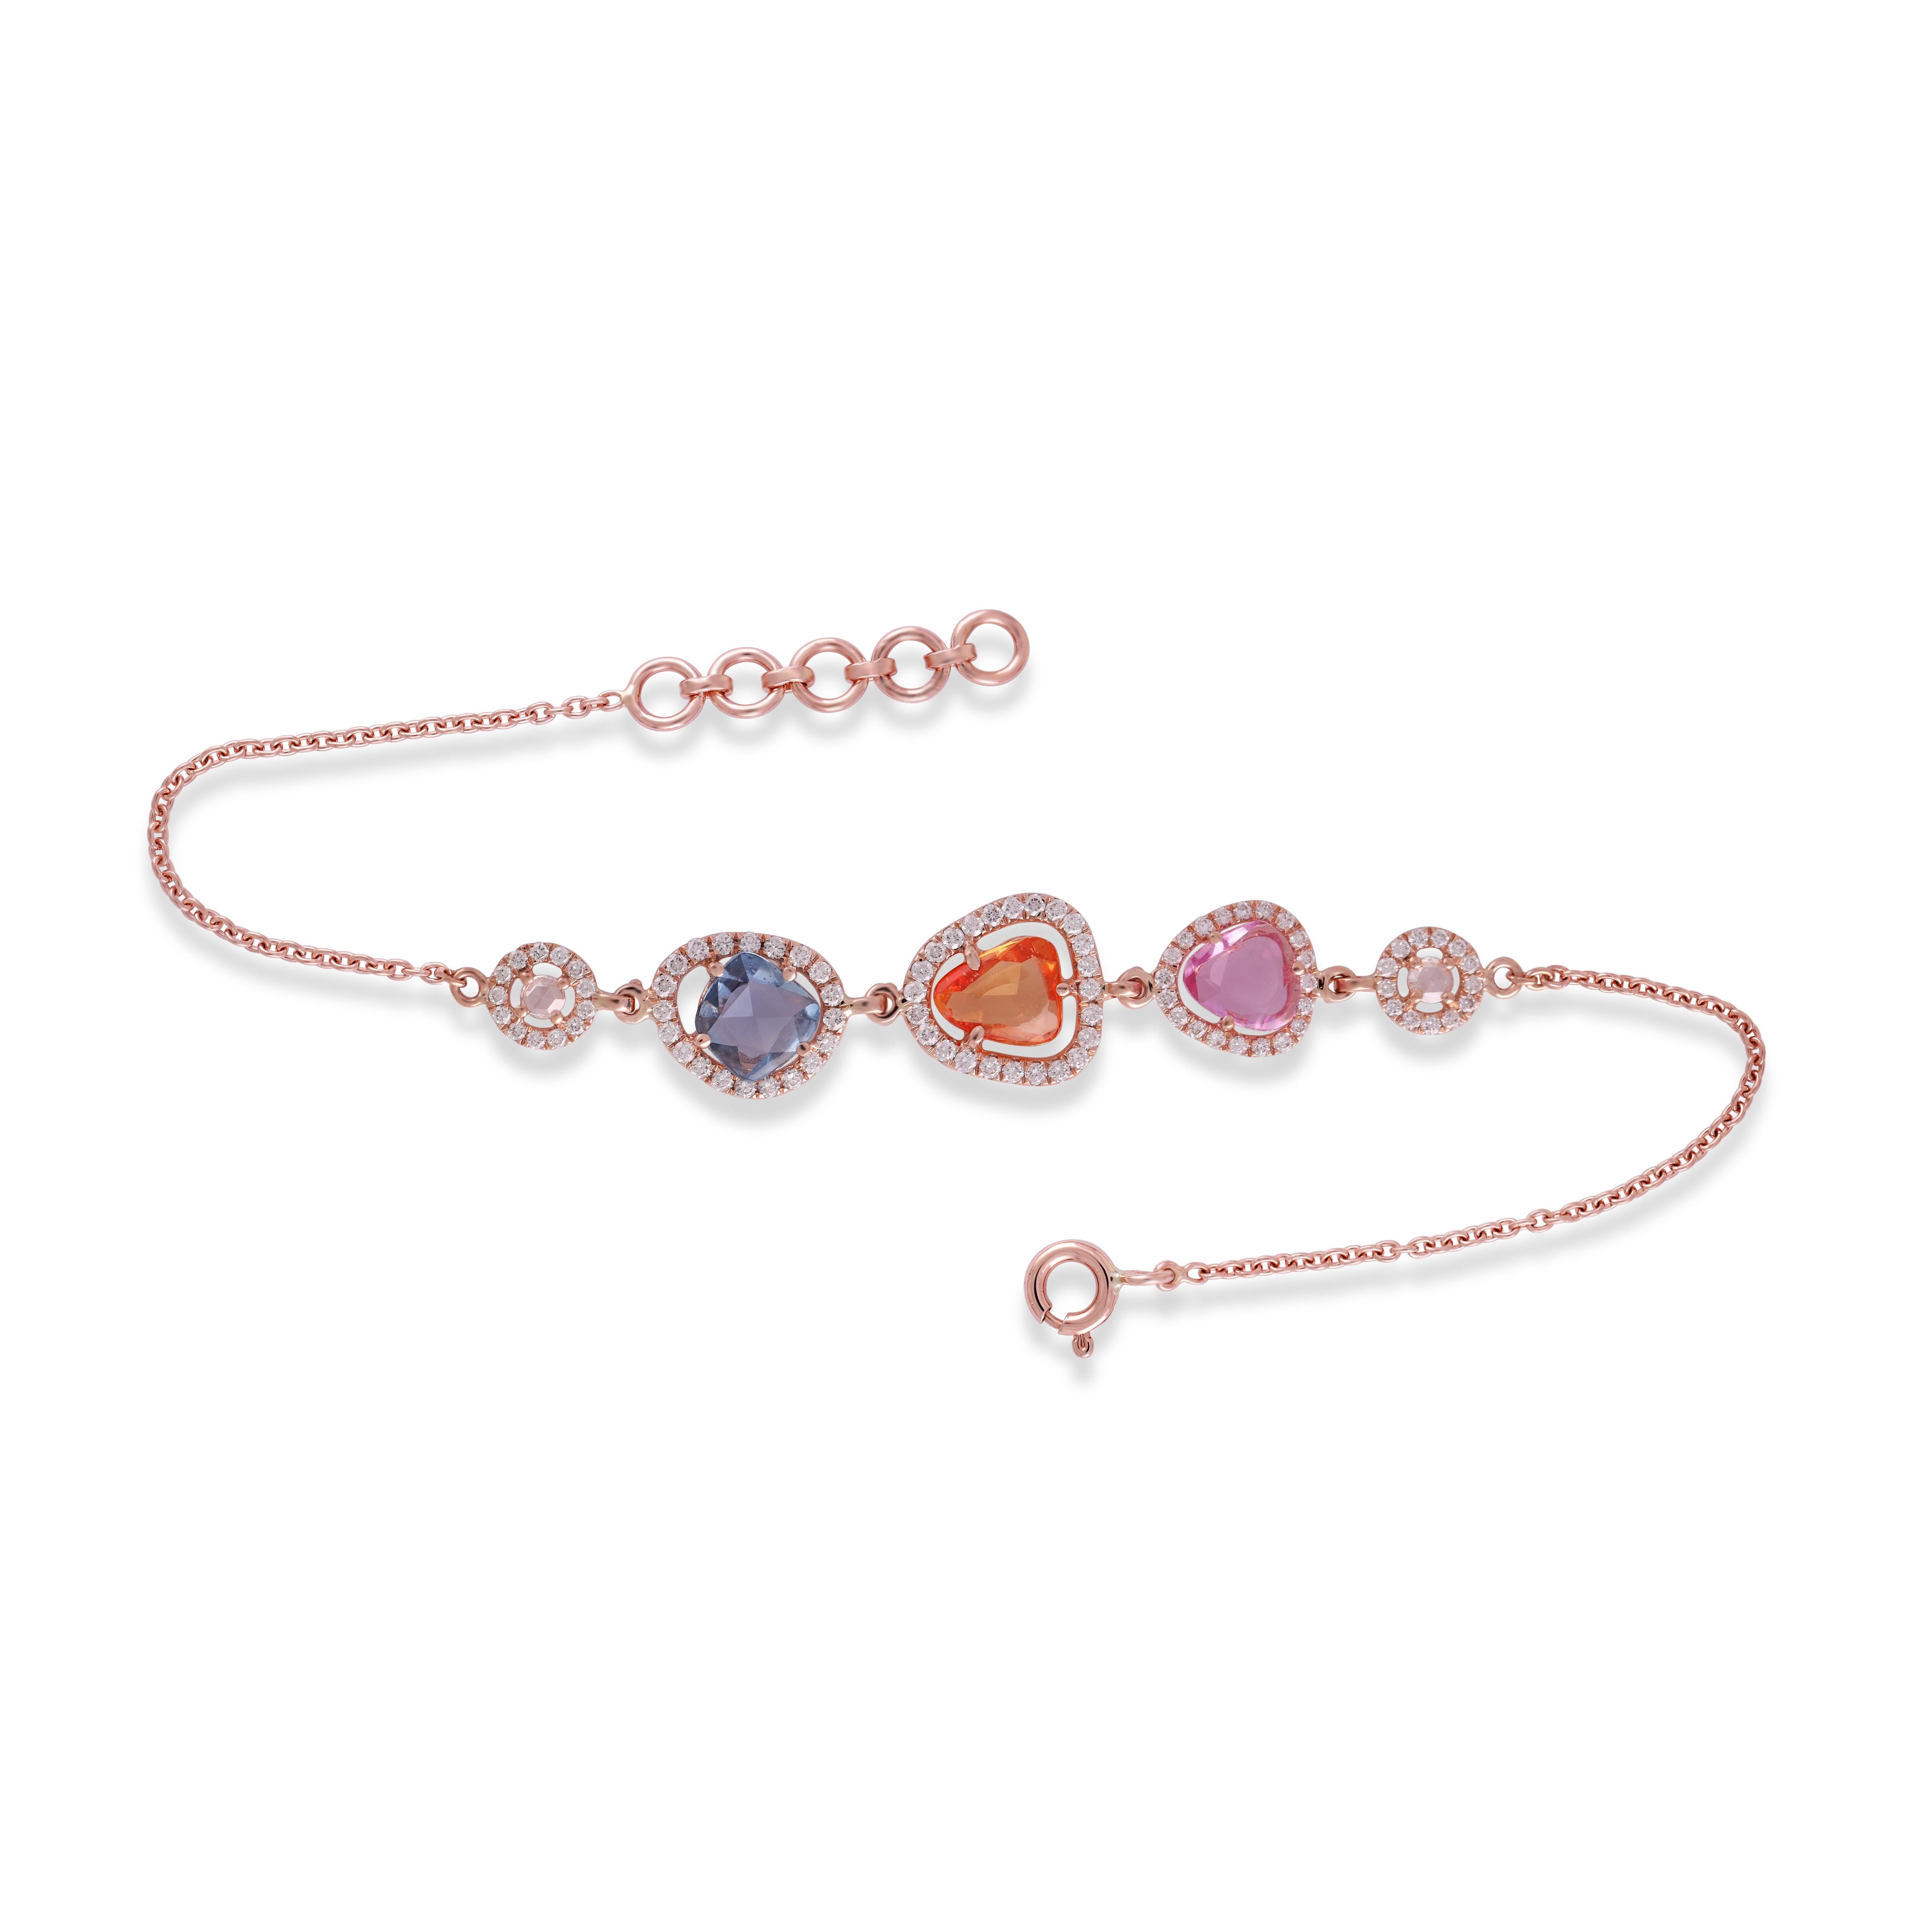 A very beautiful and dainty Multi Sapphire Chain Bracelet let in 18K Rose Gold & Diamonds. The weight of the Multi Sapphires is 2.46 carats. The weight of the Diamonds is 0.70 carats.

 Bracelet size - 6 - 7  inches and can be Resize.
